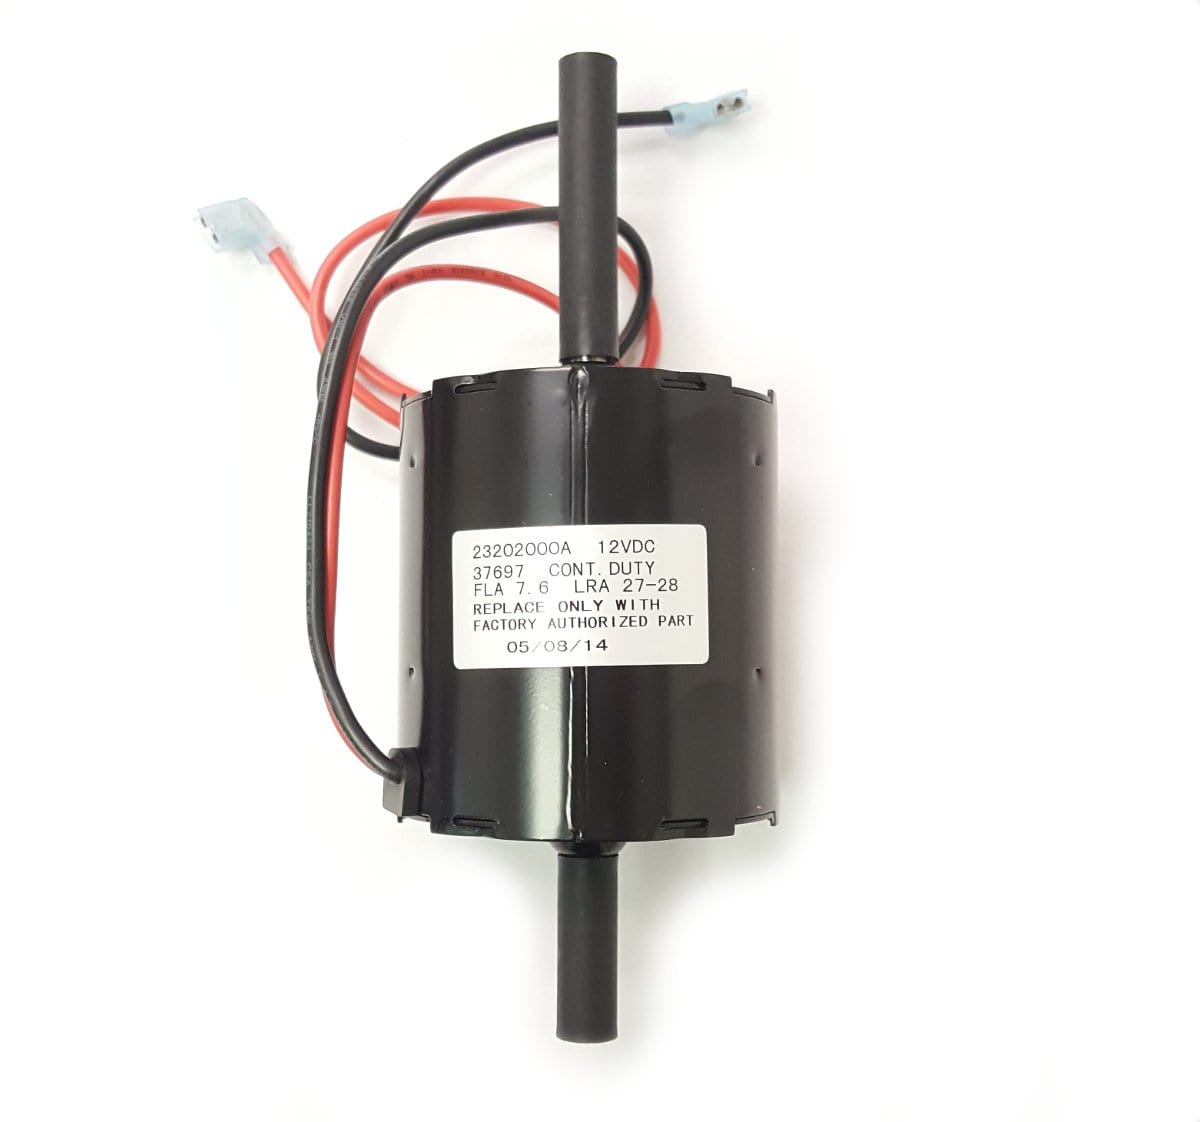 Atwood 37698 Hydro Flame Furnace Motor